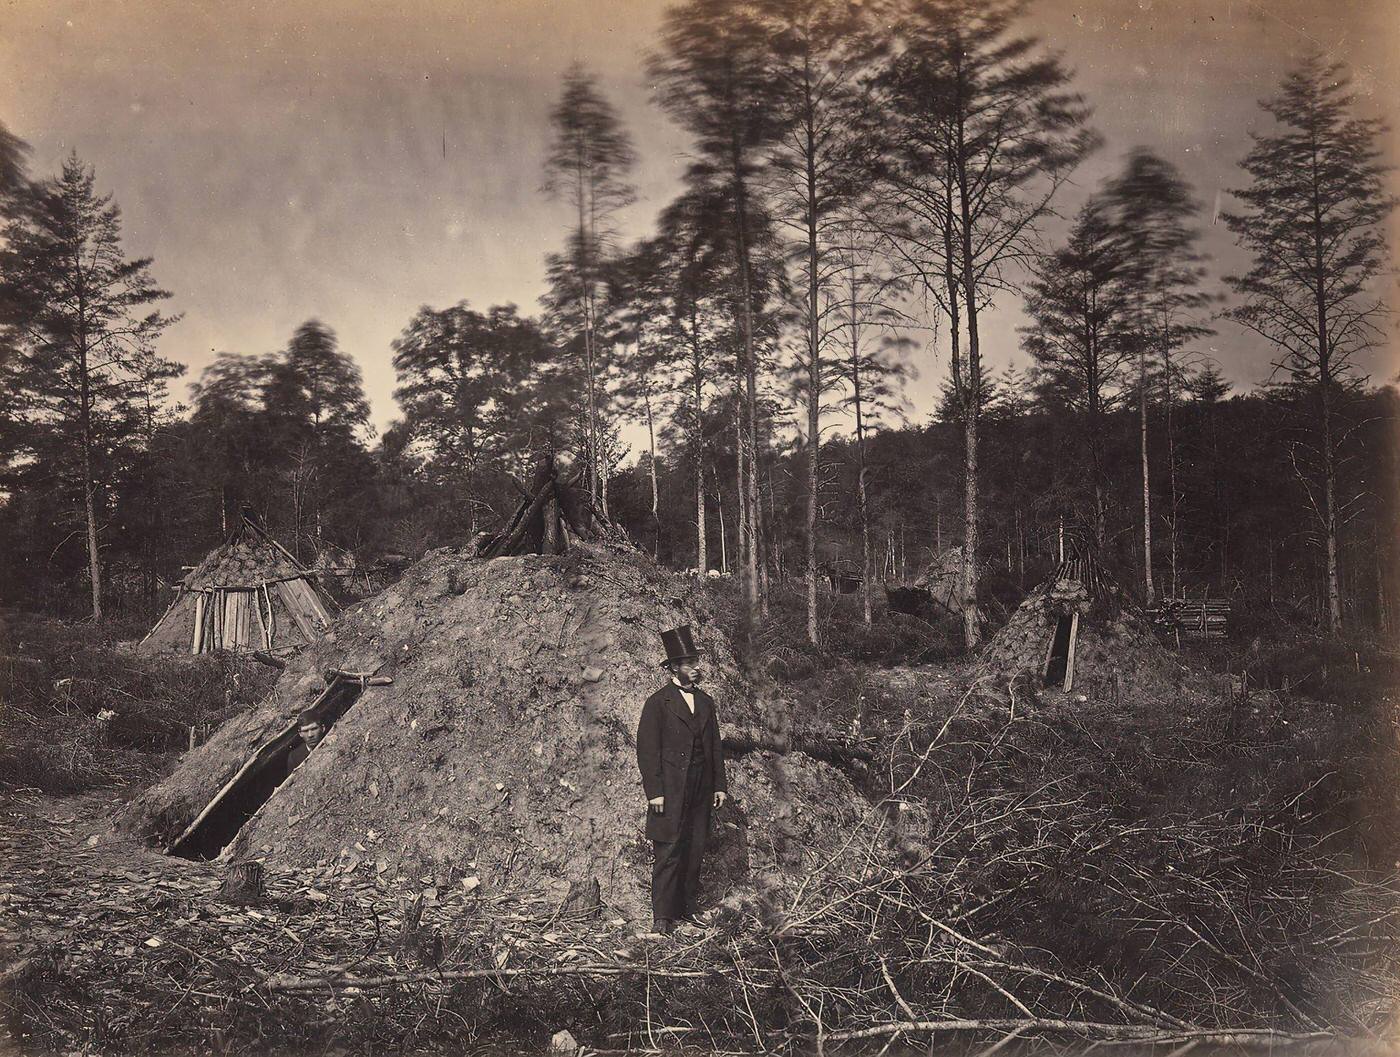 Woodchoppers' Huts in a Virginia Forest. On the Orange & Alexandria Railroad. Wood Supplied U.S.M.R. Railroads under Supervision of Major Brayton, June 1863.